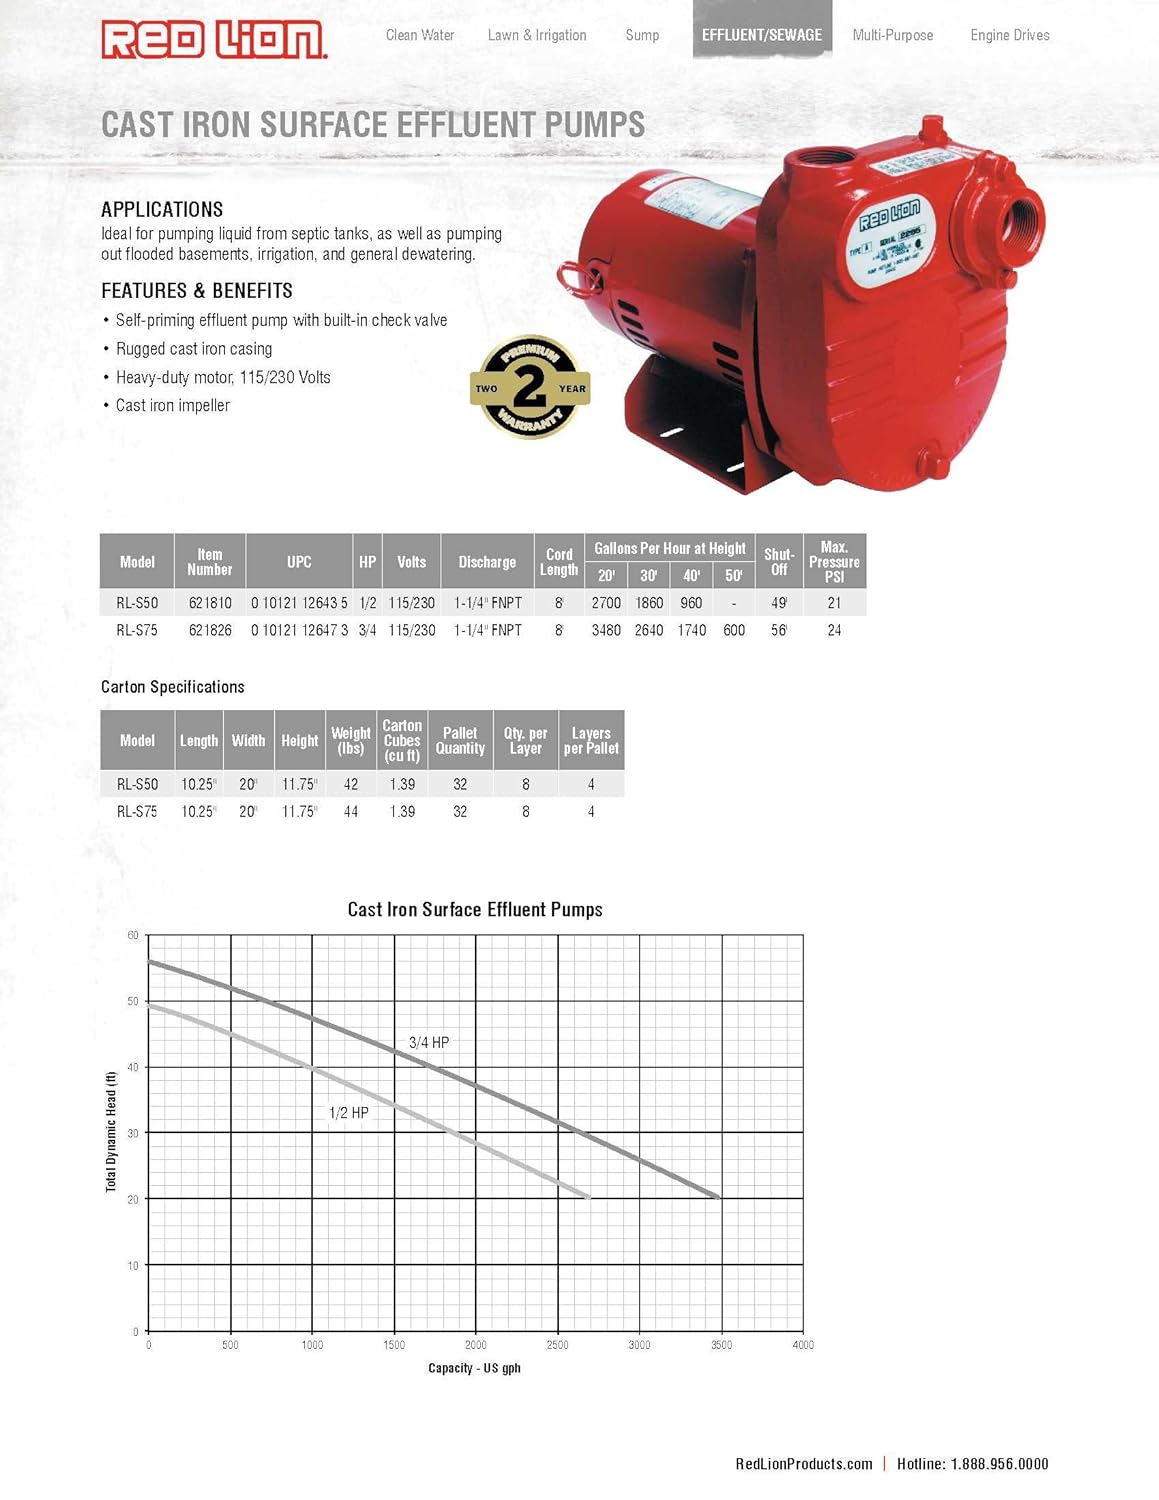 Red Lion Well Pump 3/4 Hp Shallow Well 120v Wiring Diagram